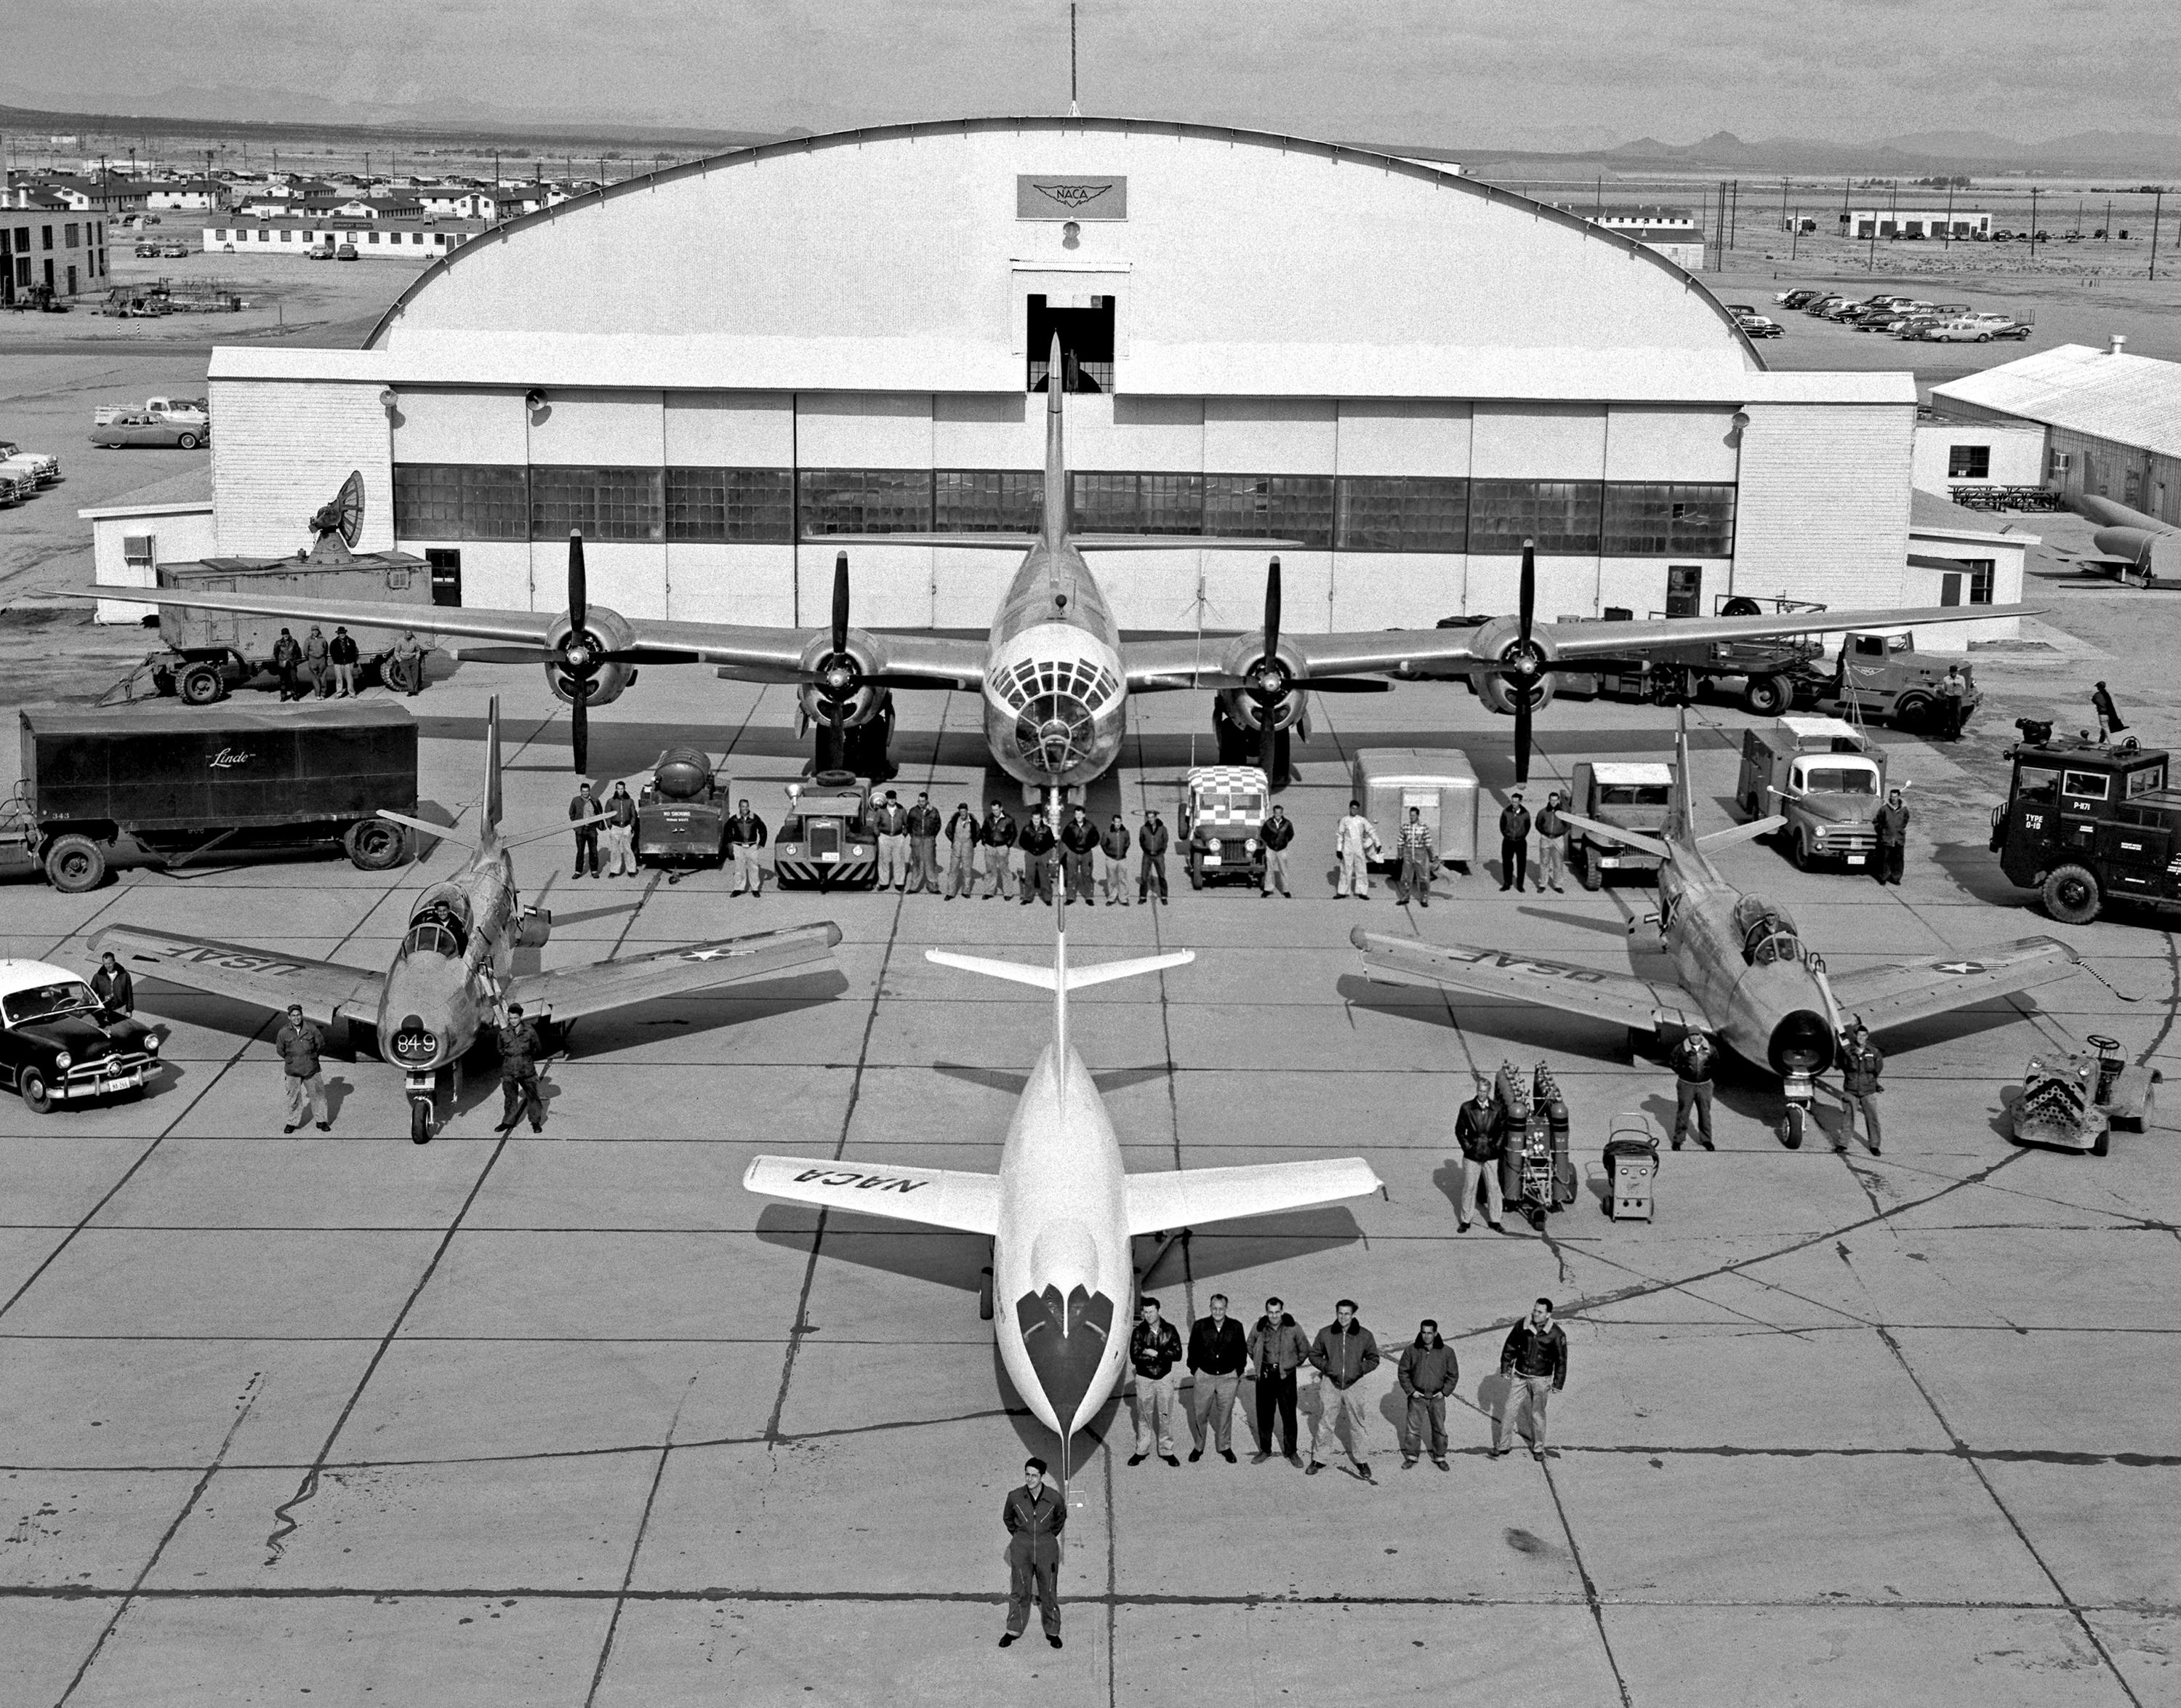 Scott Crossfield and the Douglas D-558-II Skyrocket, with their support team: two North American F-86 Sabre chase planes and the Boeing P2B-1S Superfortress mothership, at the NACA High Speed Flight Station, Edwards Air Force Base, California, 1 January 1954. (NASA)